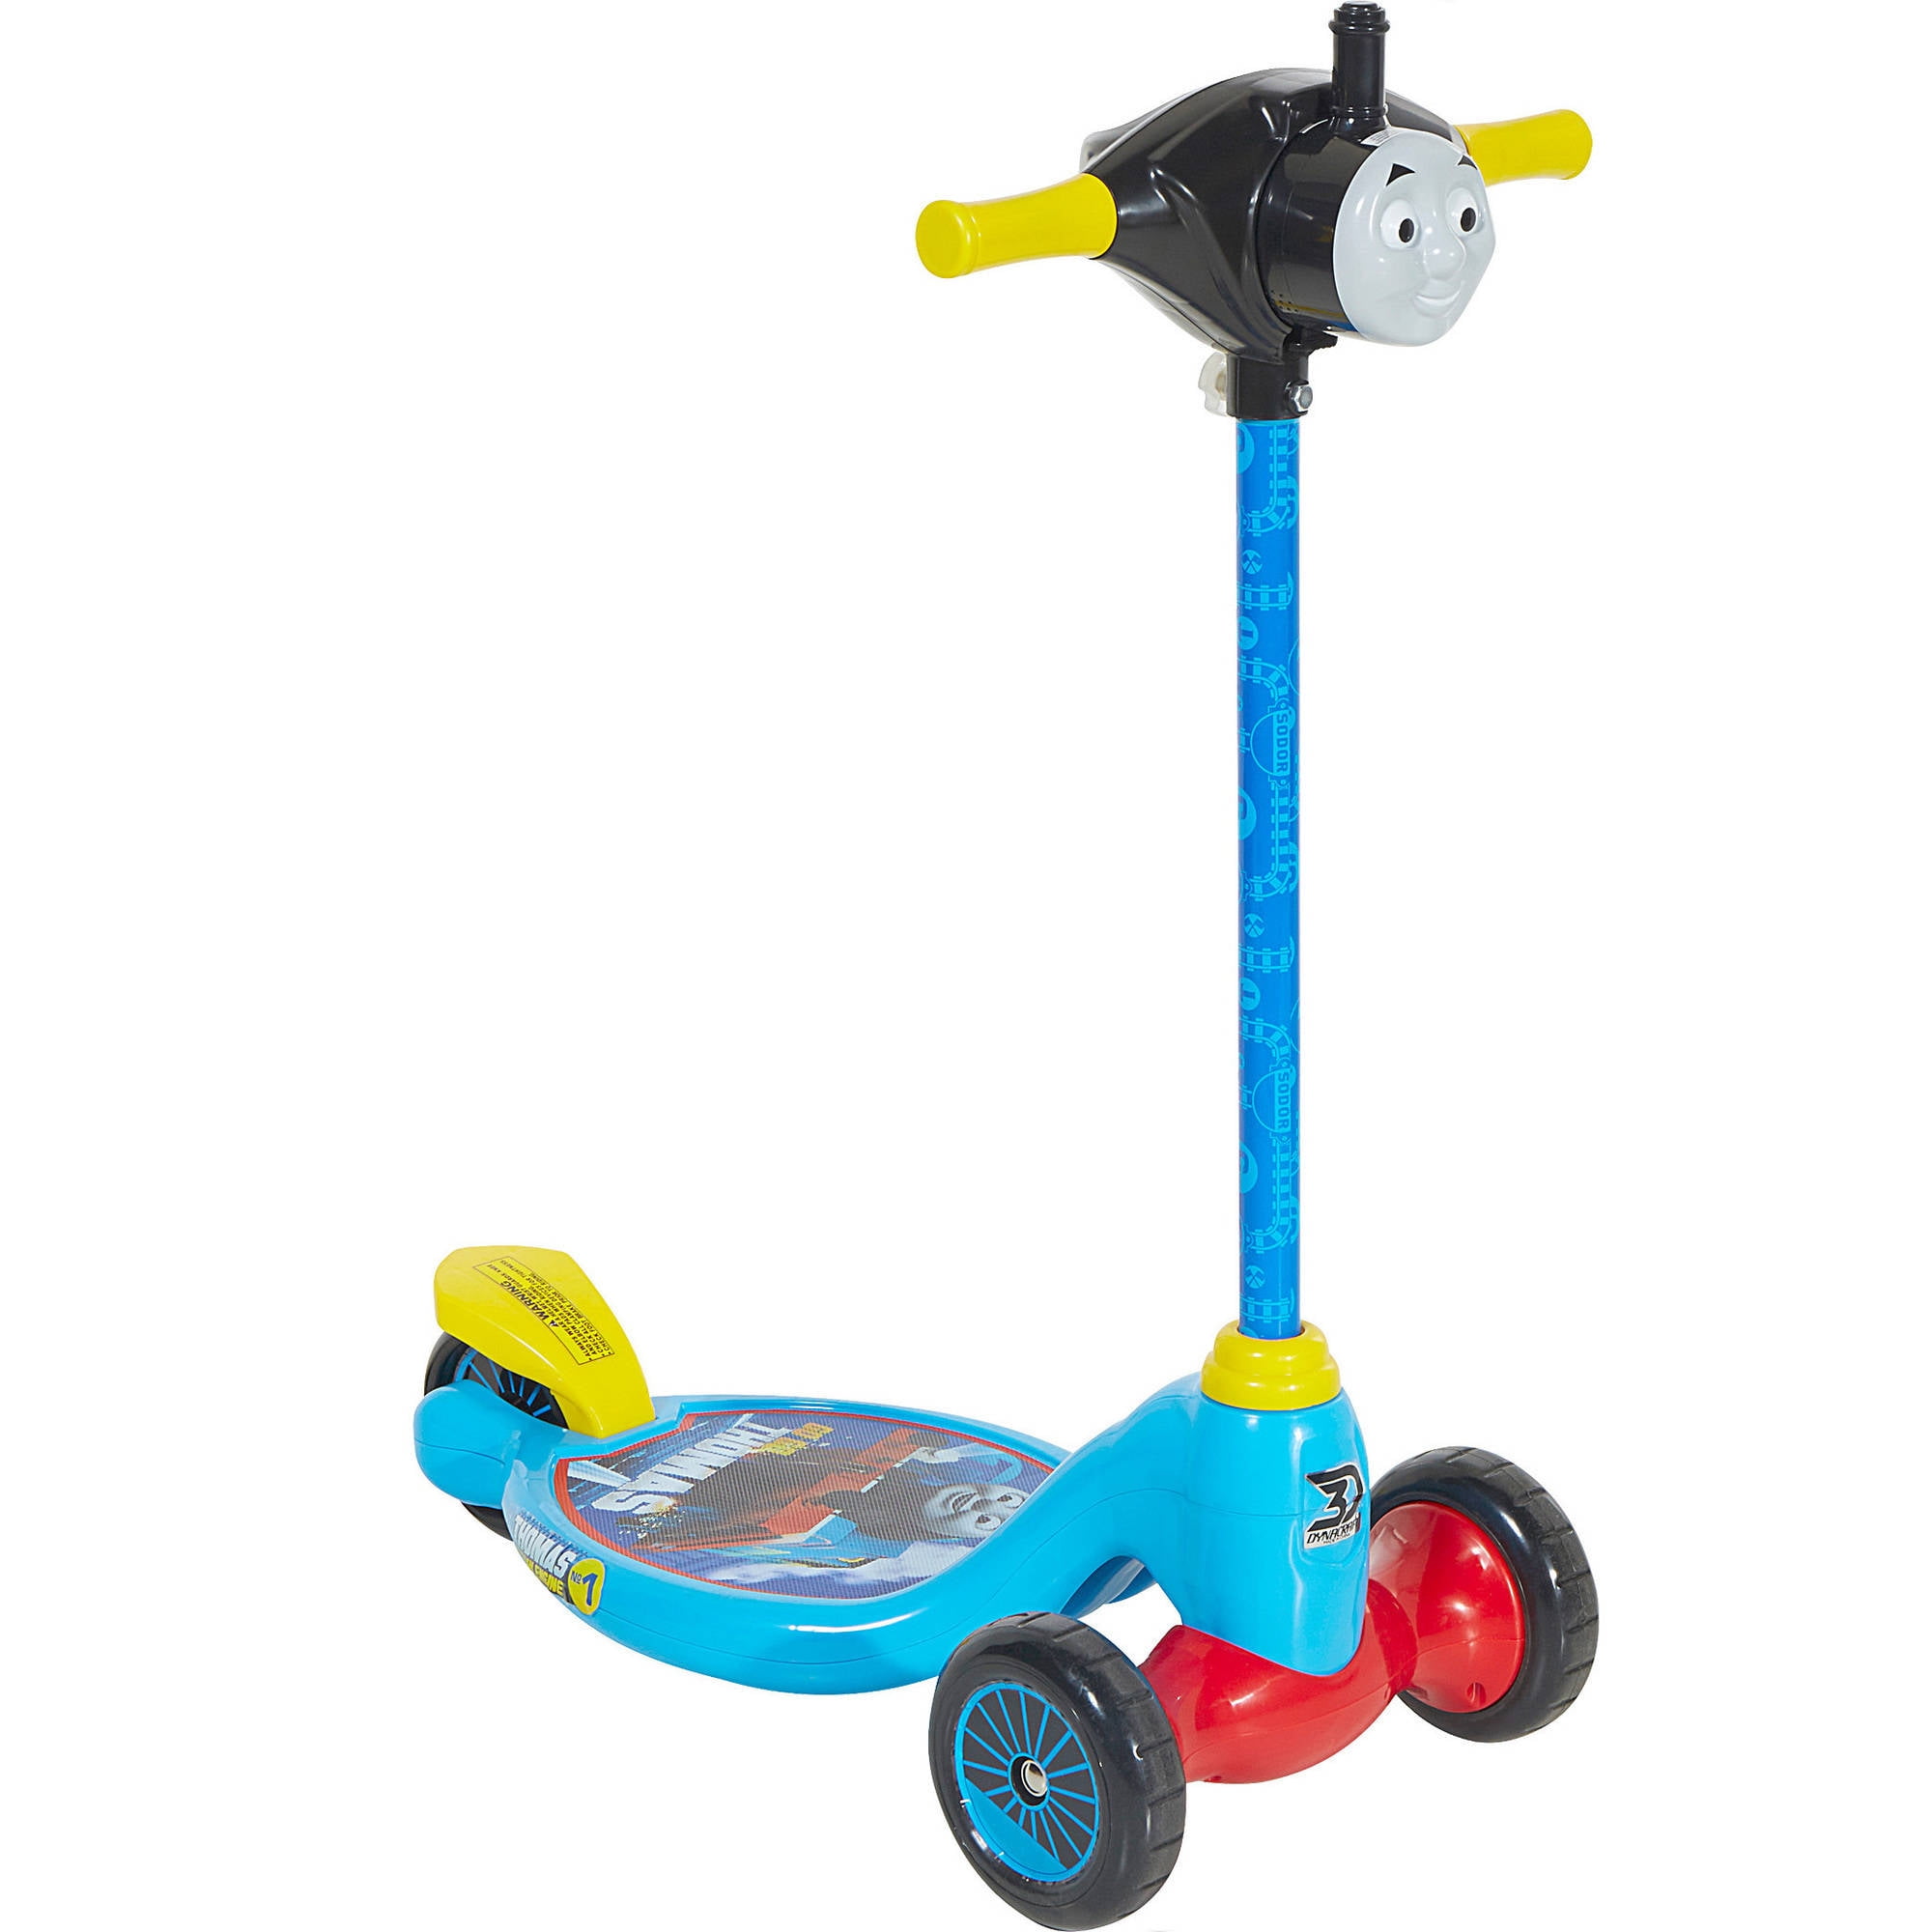 THOMAS THE TANK ENGINE BLUE CHILDS TRI SCOOTER BRAND NEW BOXED OUTDOOR TOYS NEW 